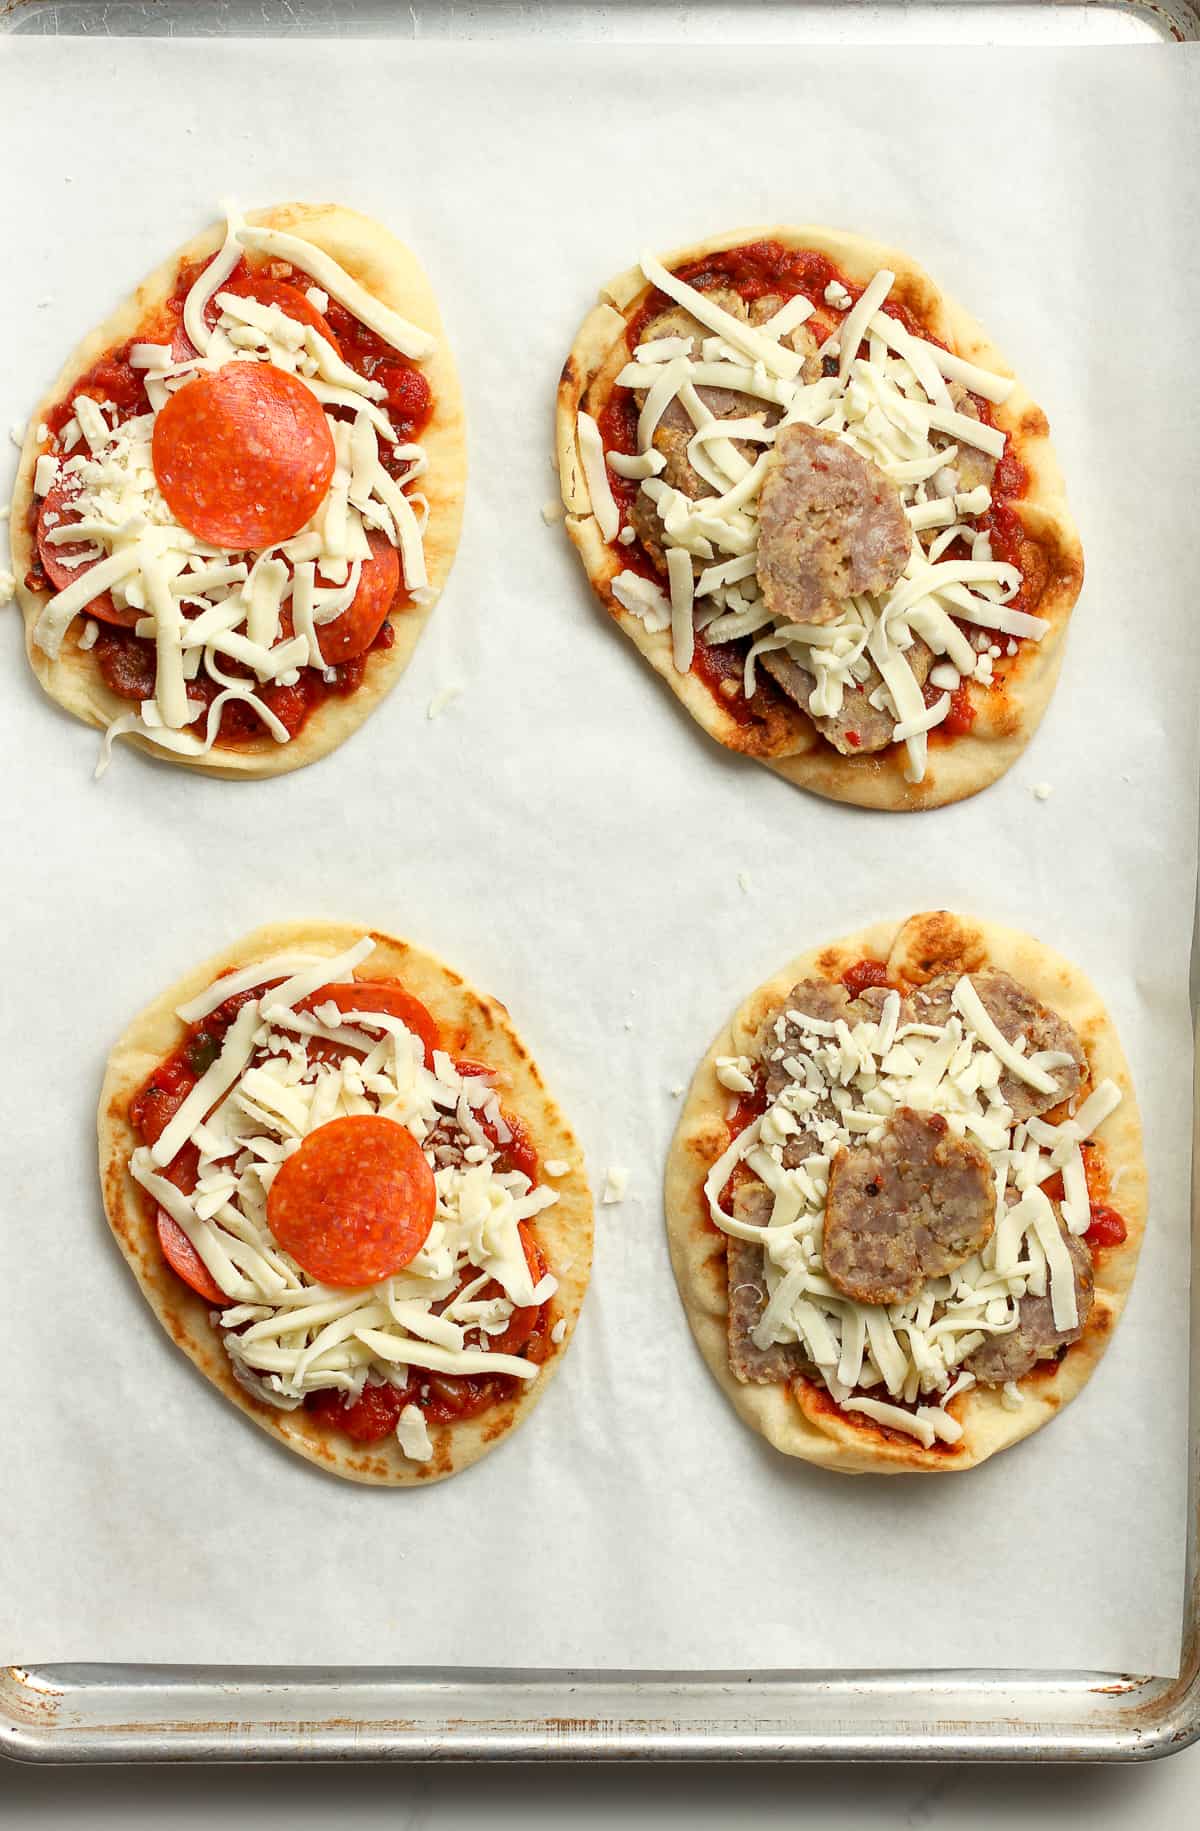 The naan bread with pizza sauce, pepperoni, sausage, and cheese.